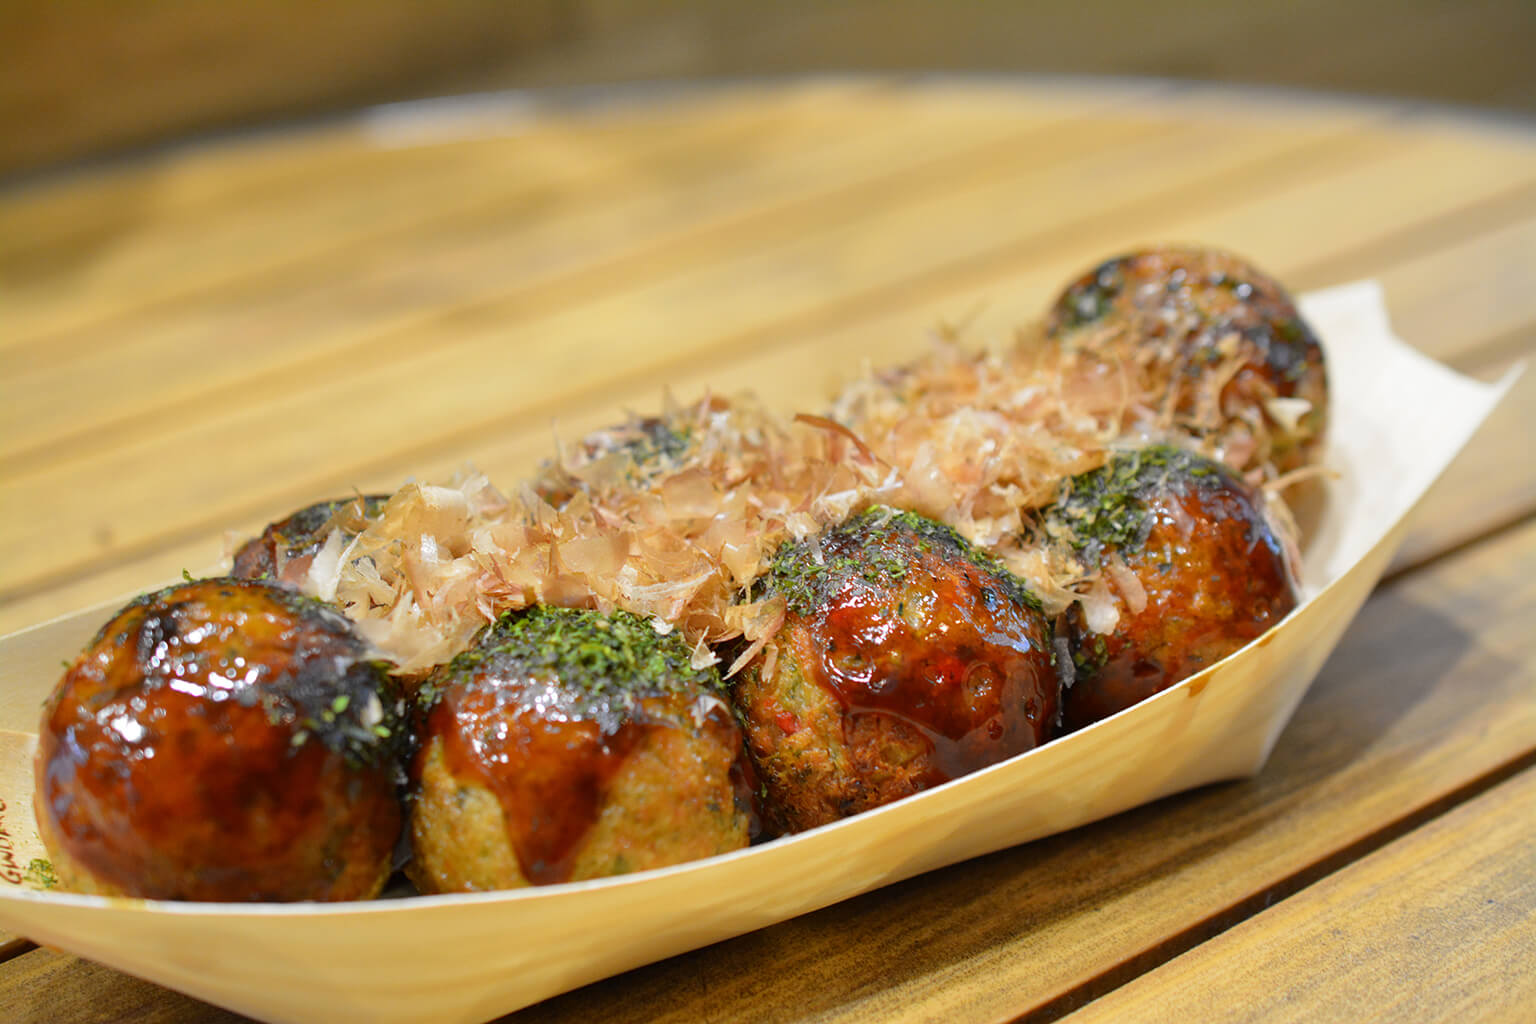 Takoyaki are pancake balls made with flour-based batter, diced octopus, and a few other ingredients such as scallions and ginger